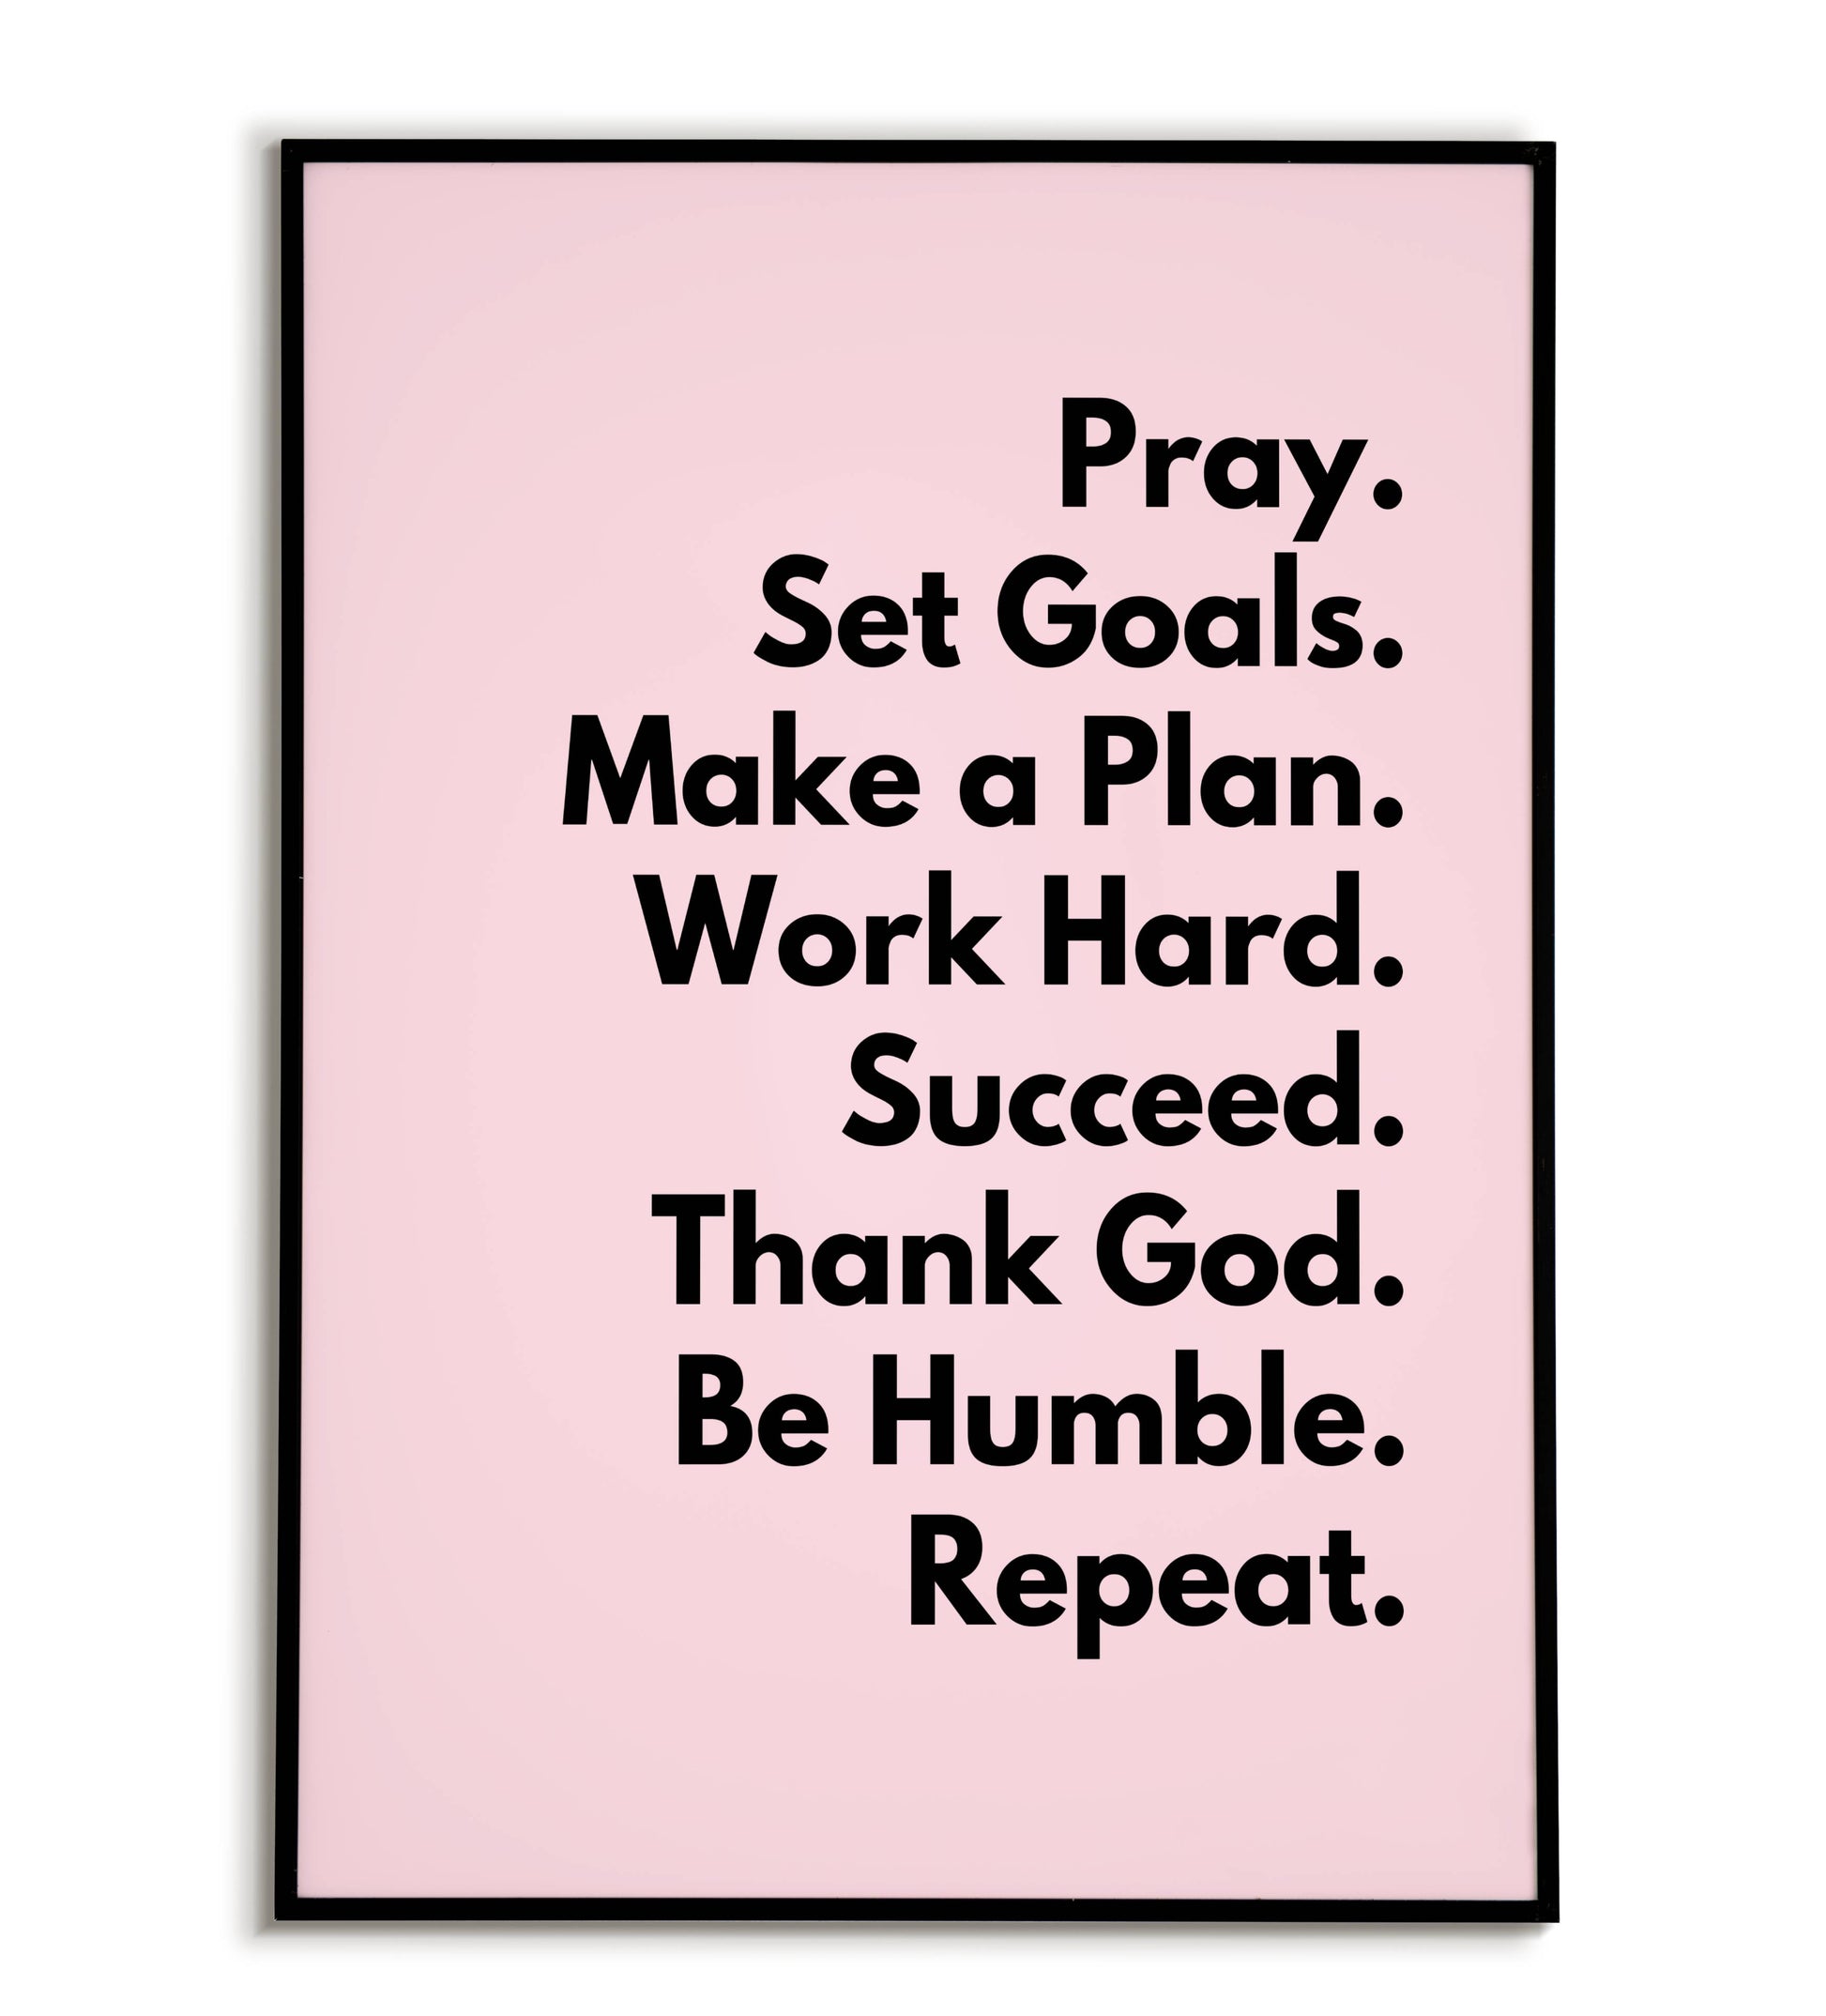 Pray. Set Goals. Make a plan. Work Hard. Succeed. Thank God. Be Humble - Inspirational quote for a balanced life.